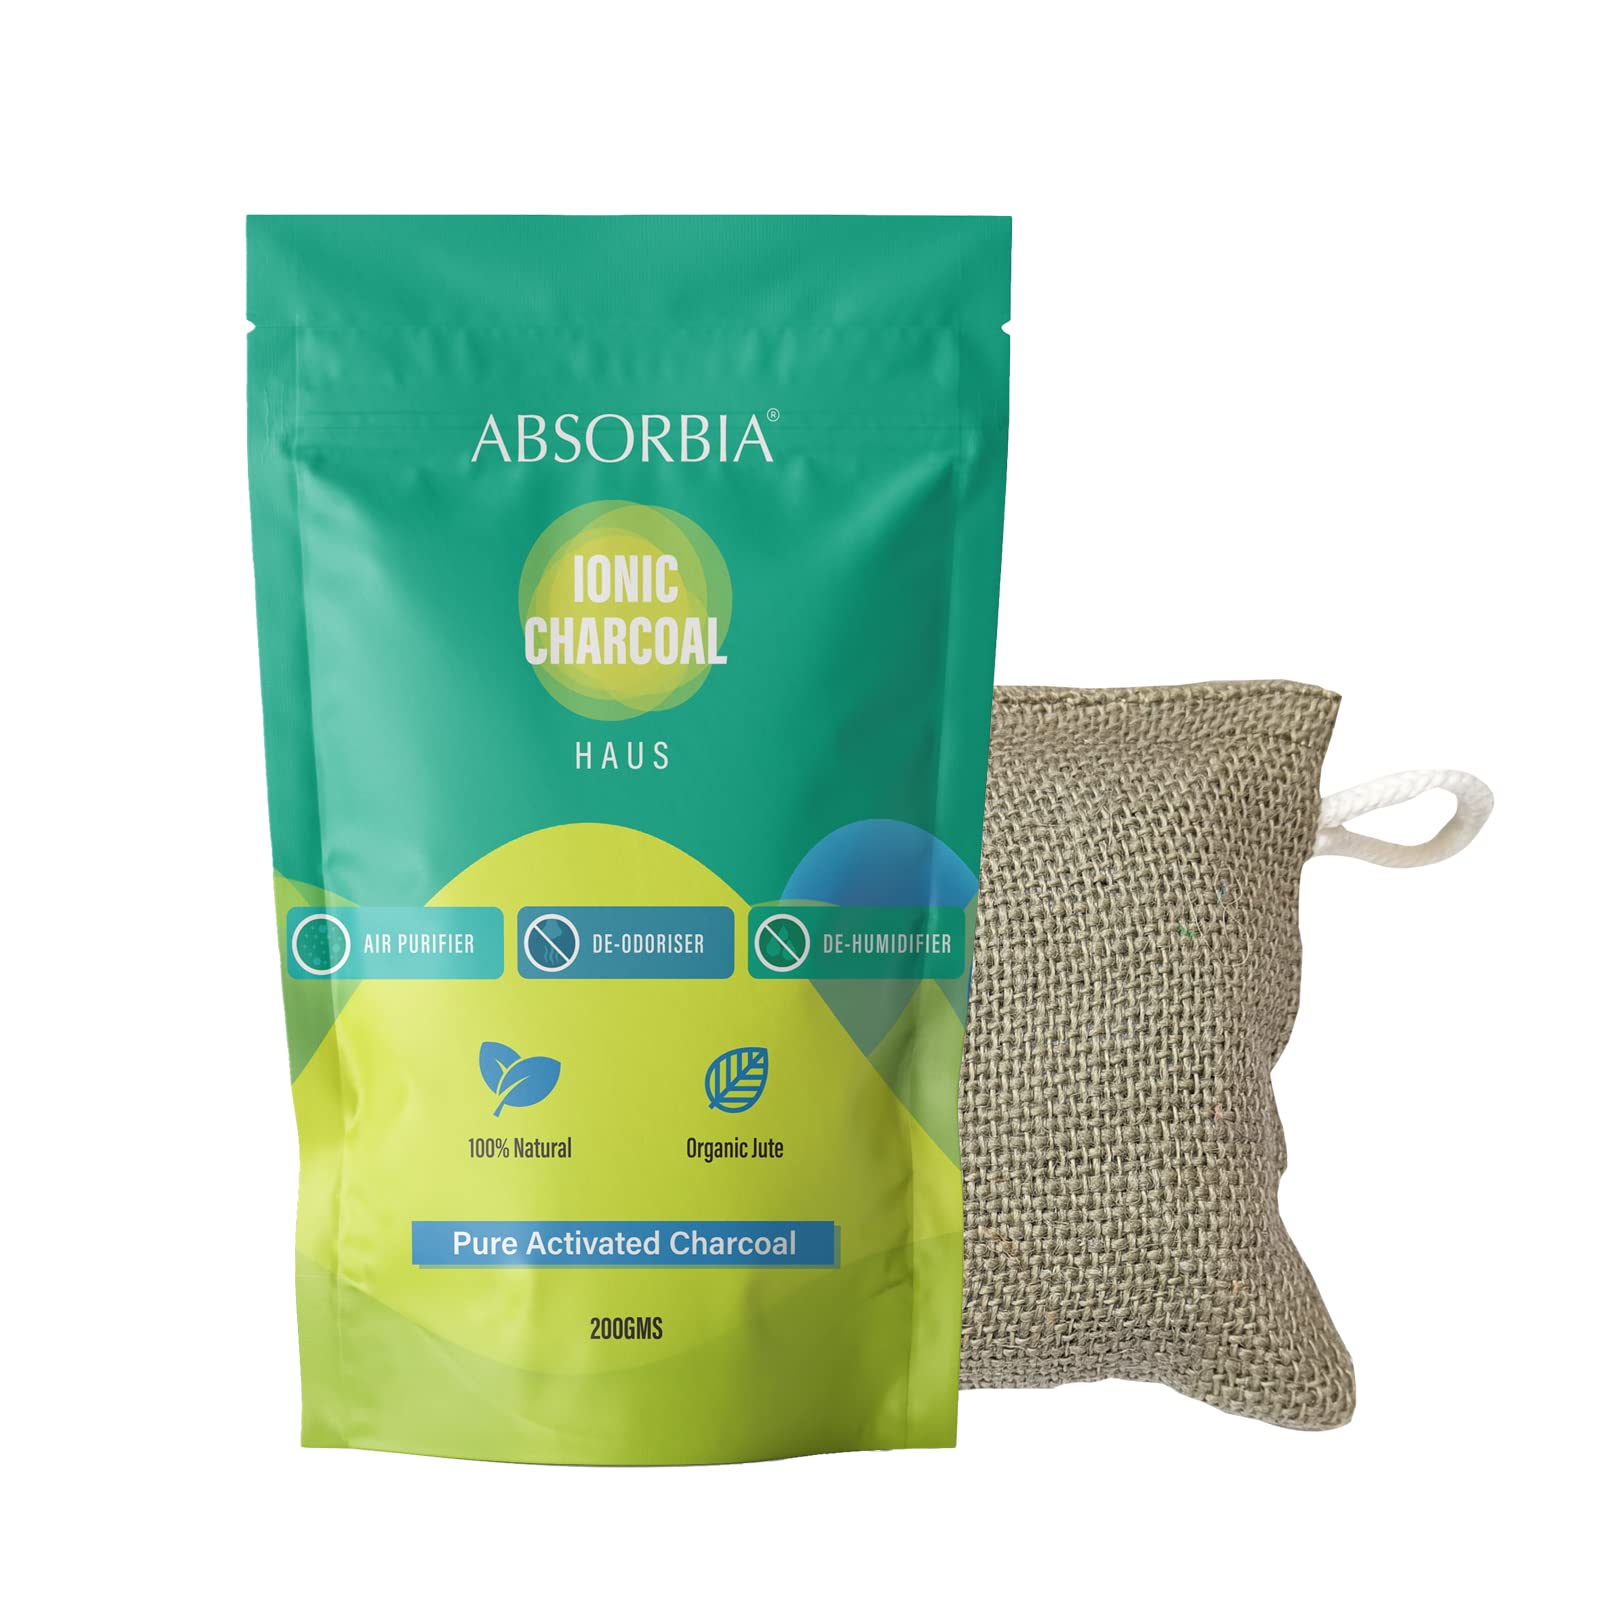 Absorbia Water Based (AVIATOR) Gel Air Freshener pack of 2(125 gms x2) & ABSORBIA IONIC HAUS Pure Activated Charcoal Air Purifyer, made with Organic Jute Bag 200 Gms